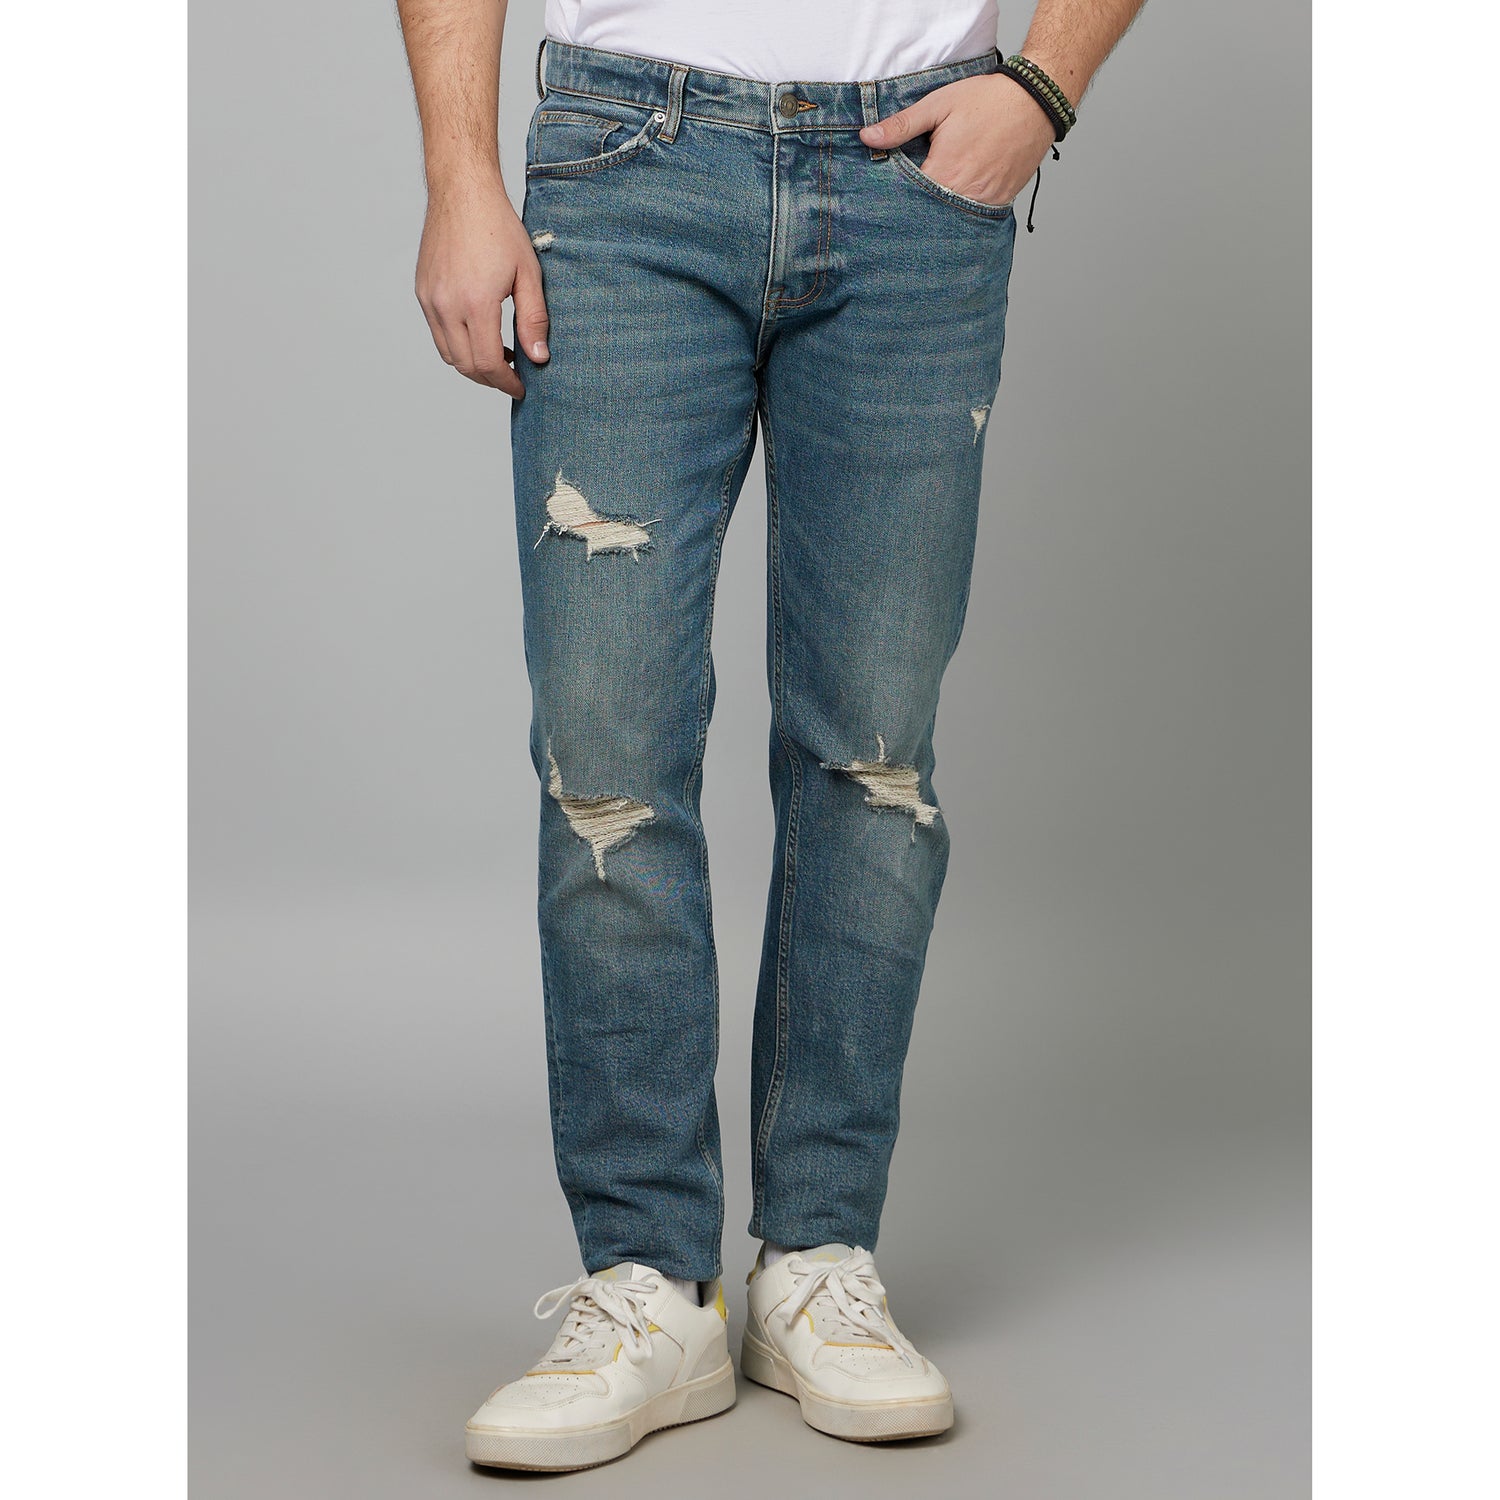 Blue Slim Fit Mildly Distressed Light Fade Whiskers Jeans (FOSTROY)